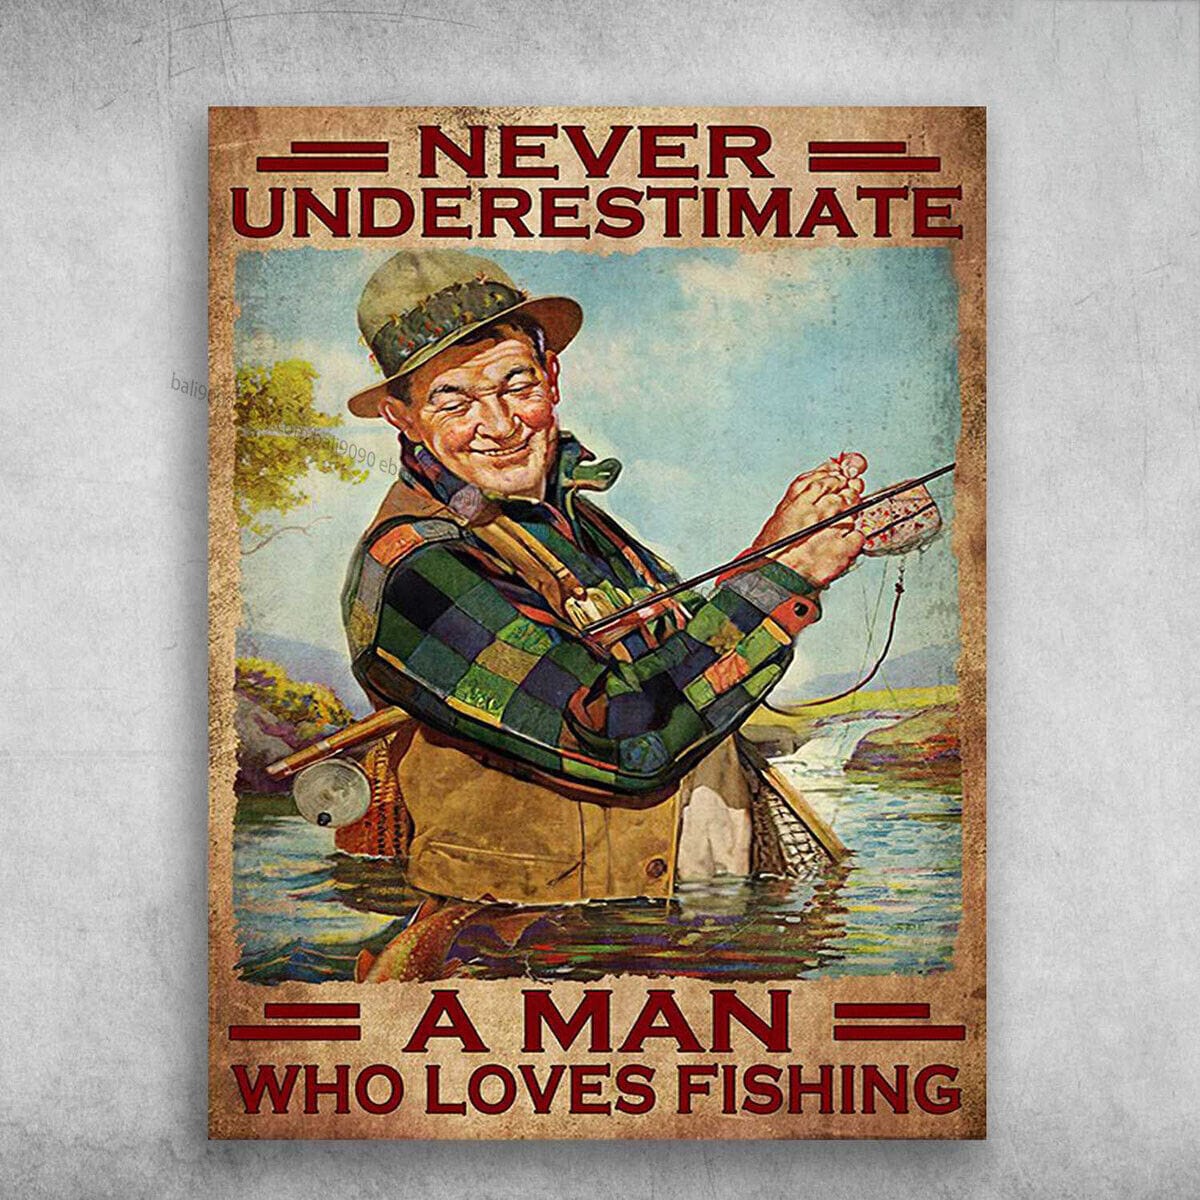 Fishing Poster, Fishing Canvas, Fishing Vitage Poster, Never